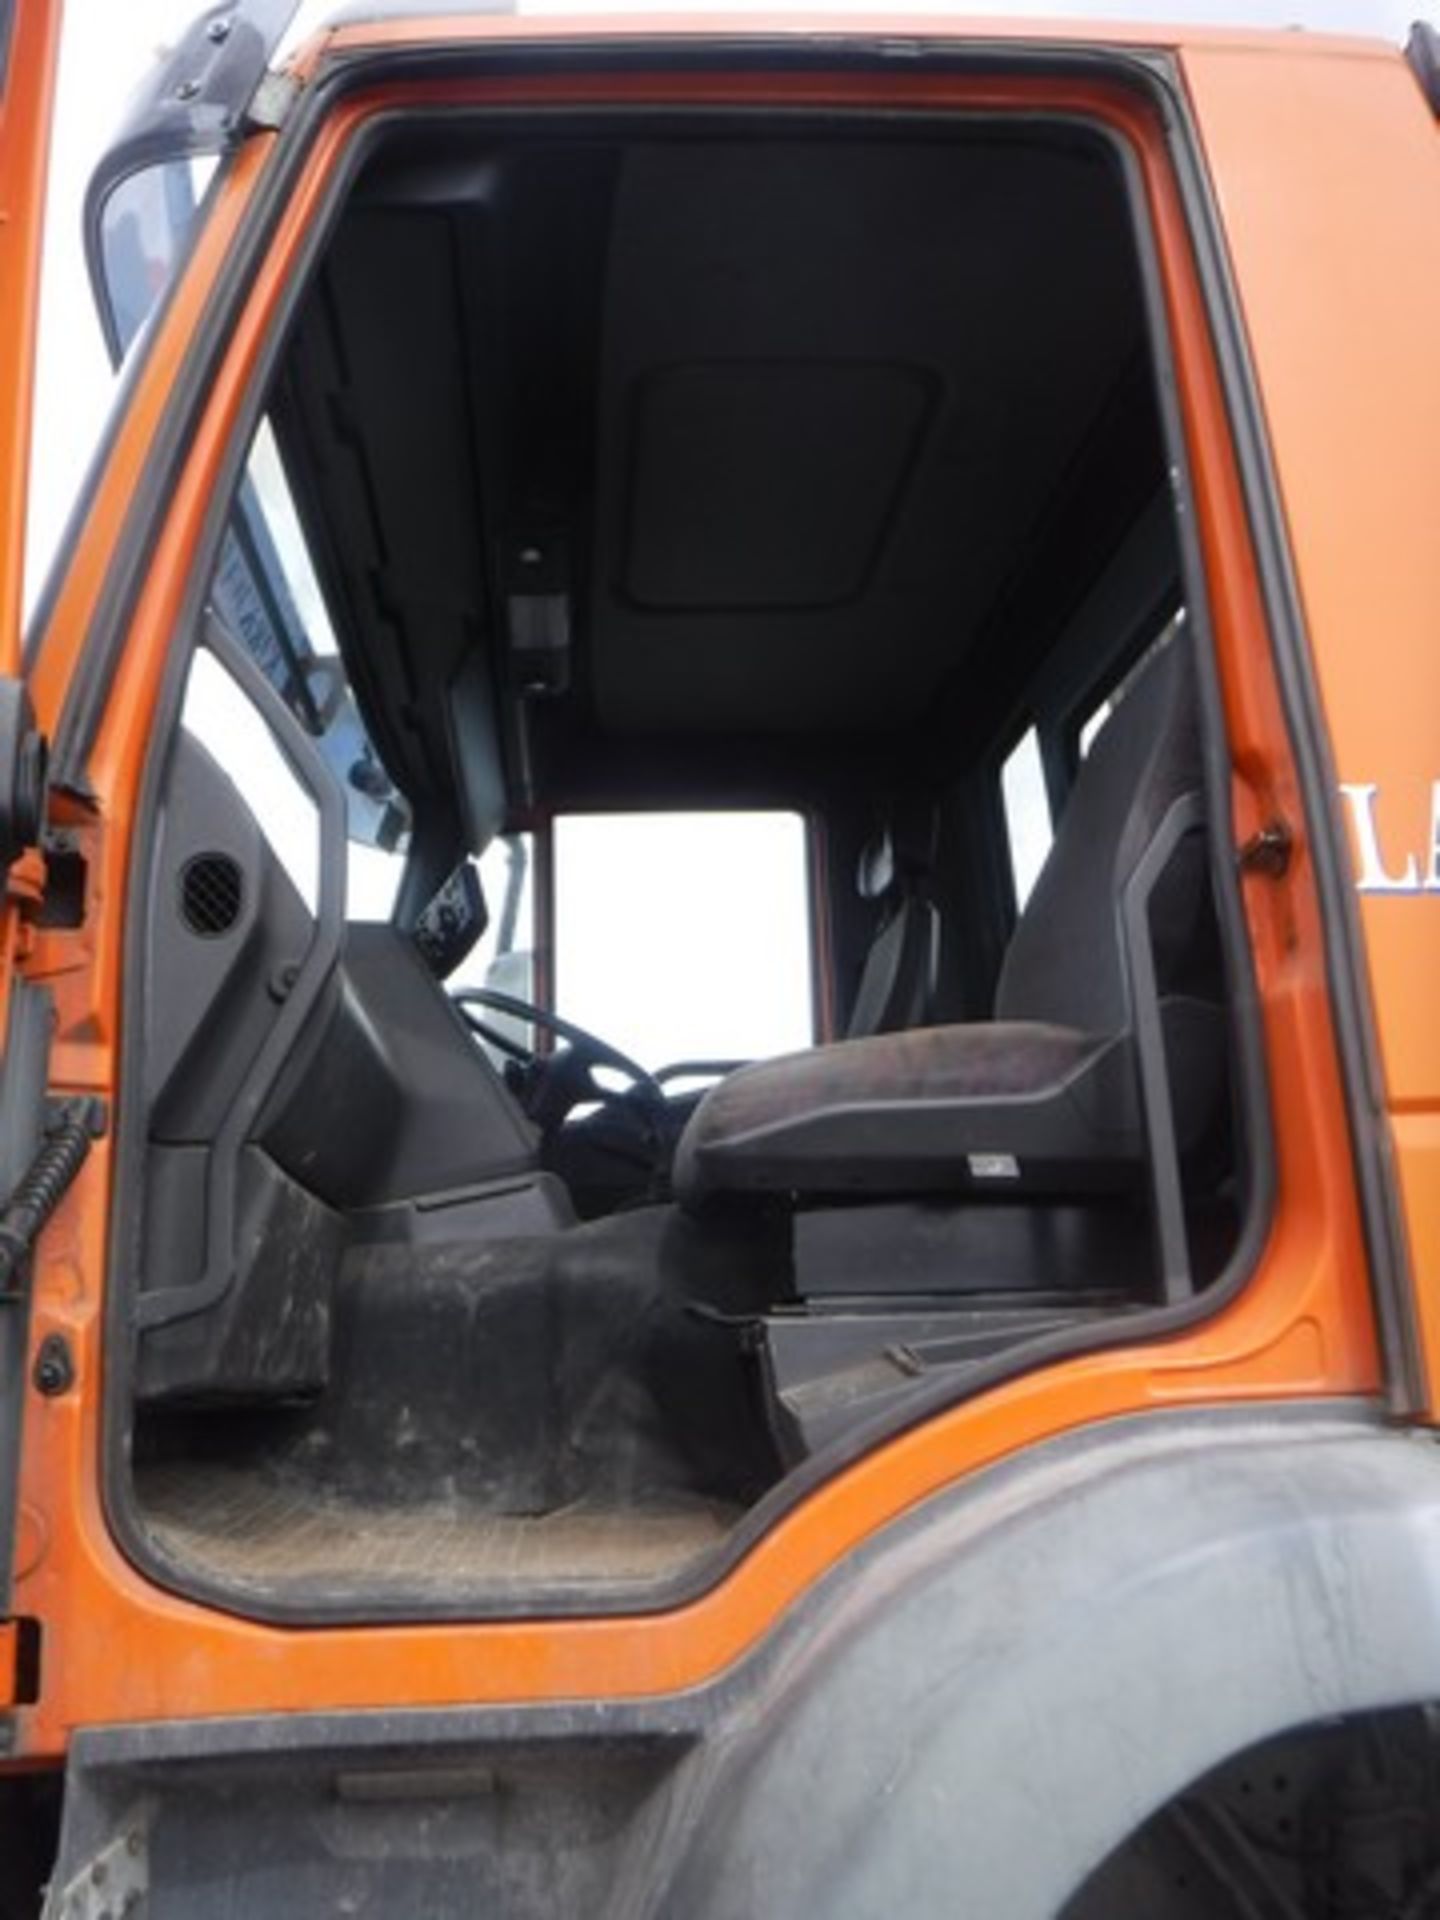 IVECO DAILY 50C15 3.5WB - 7790cc - Image 3 of 21